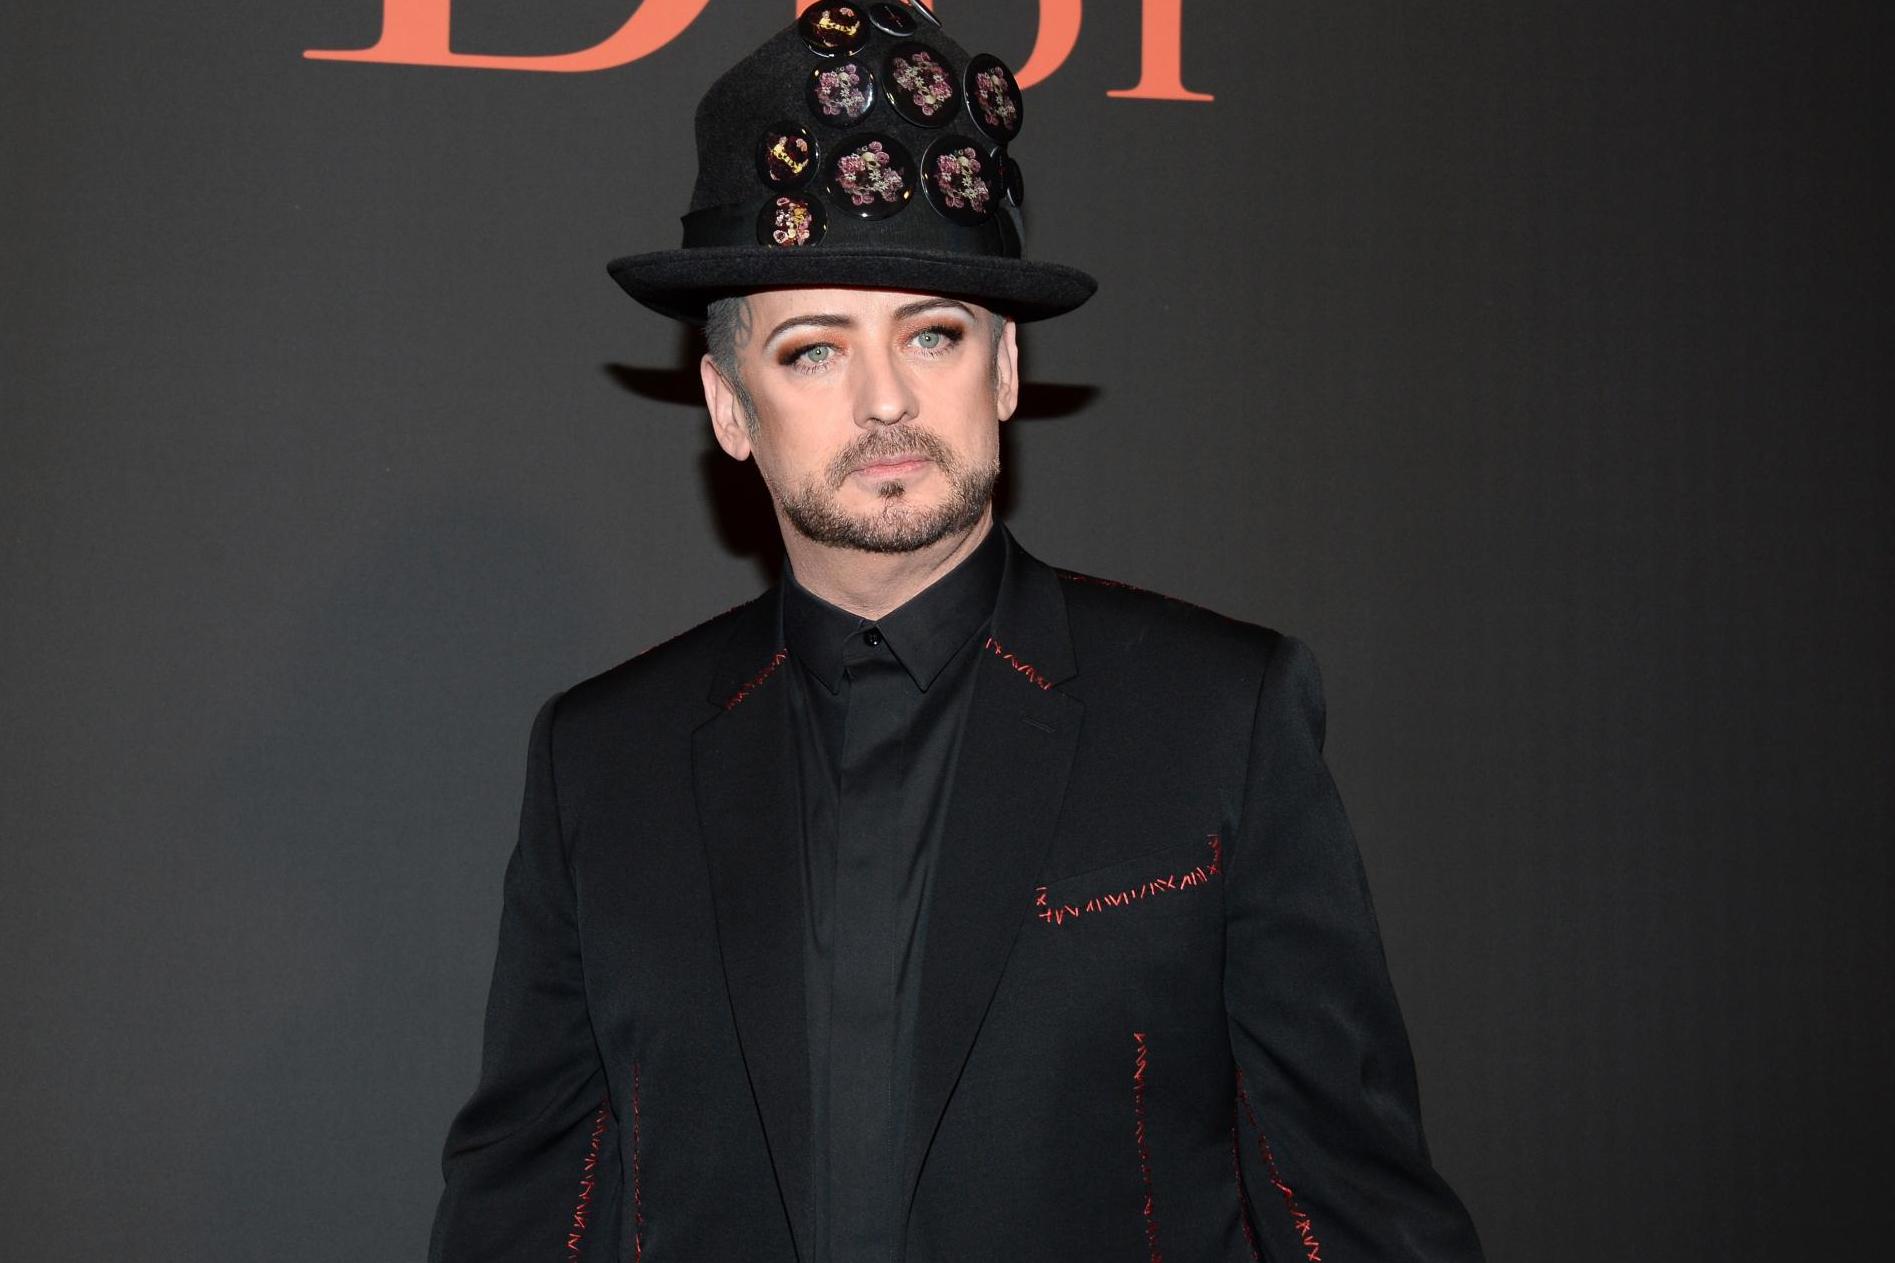 Boy George wants Sophie Turner to play him in biopic: 'That would upset people, which I quite like'